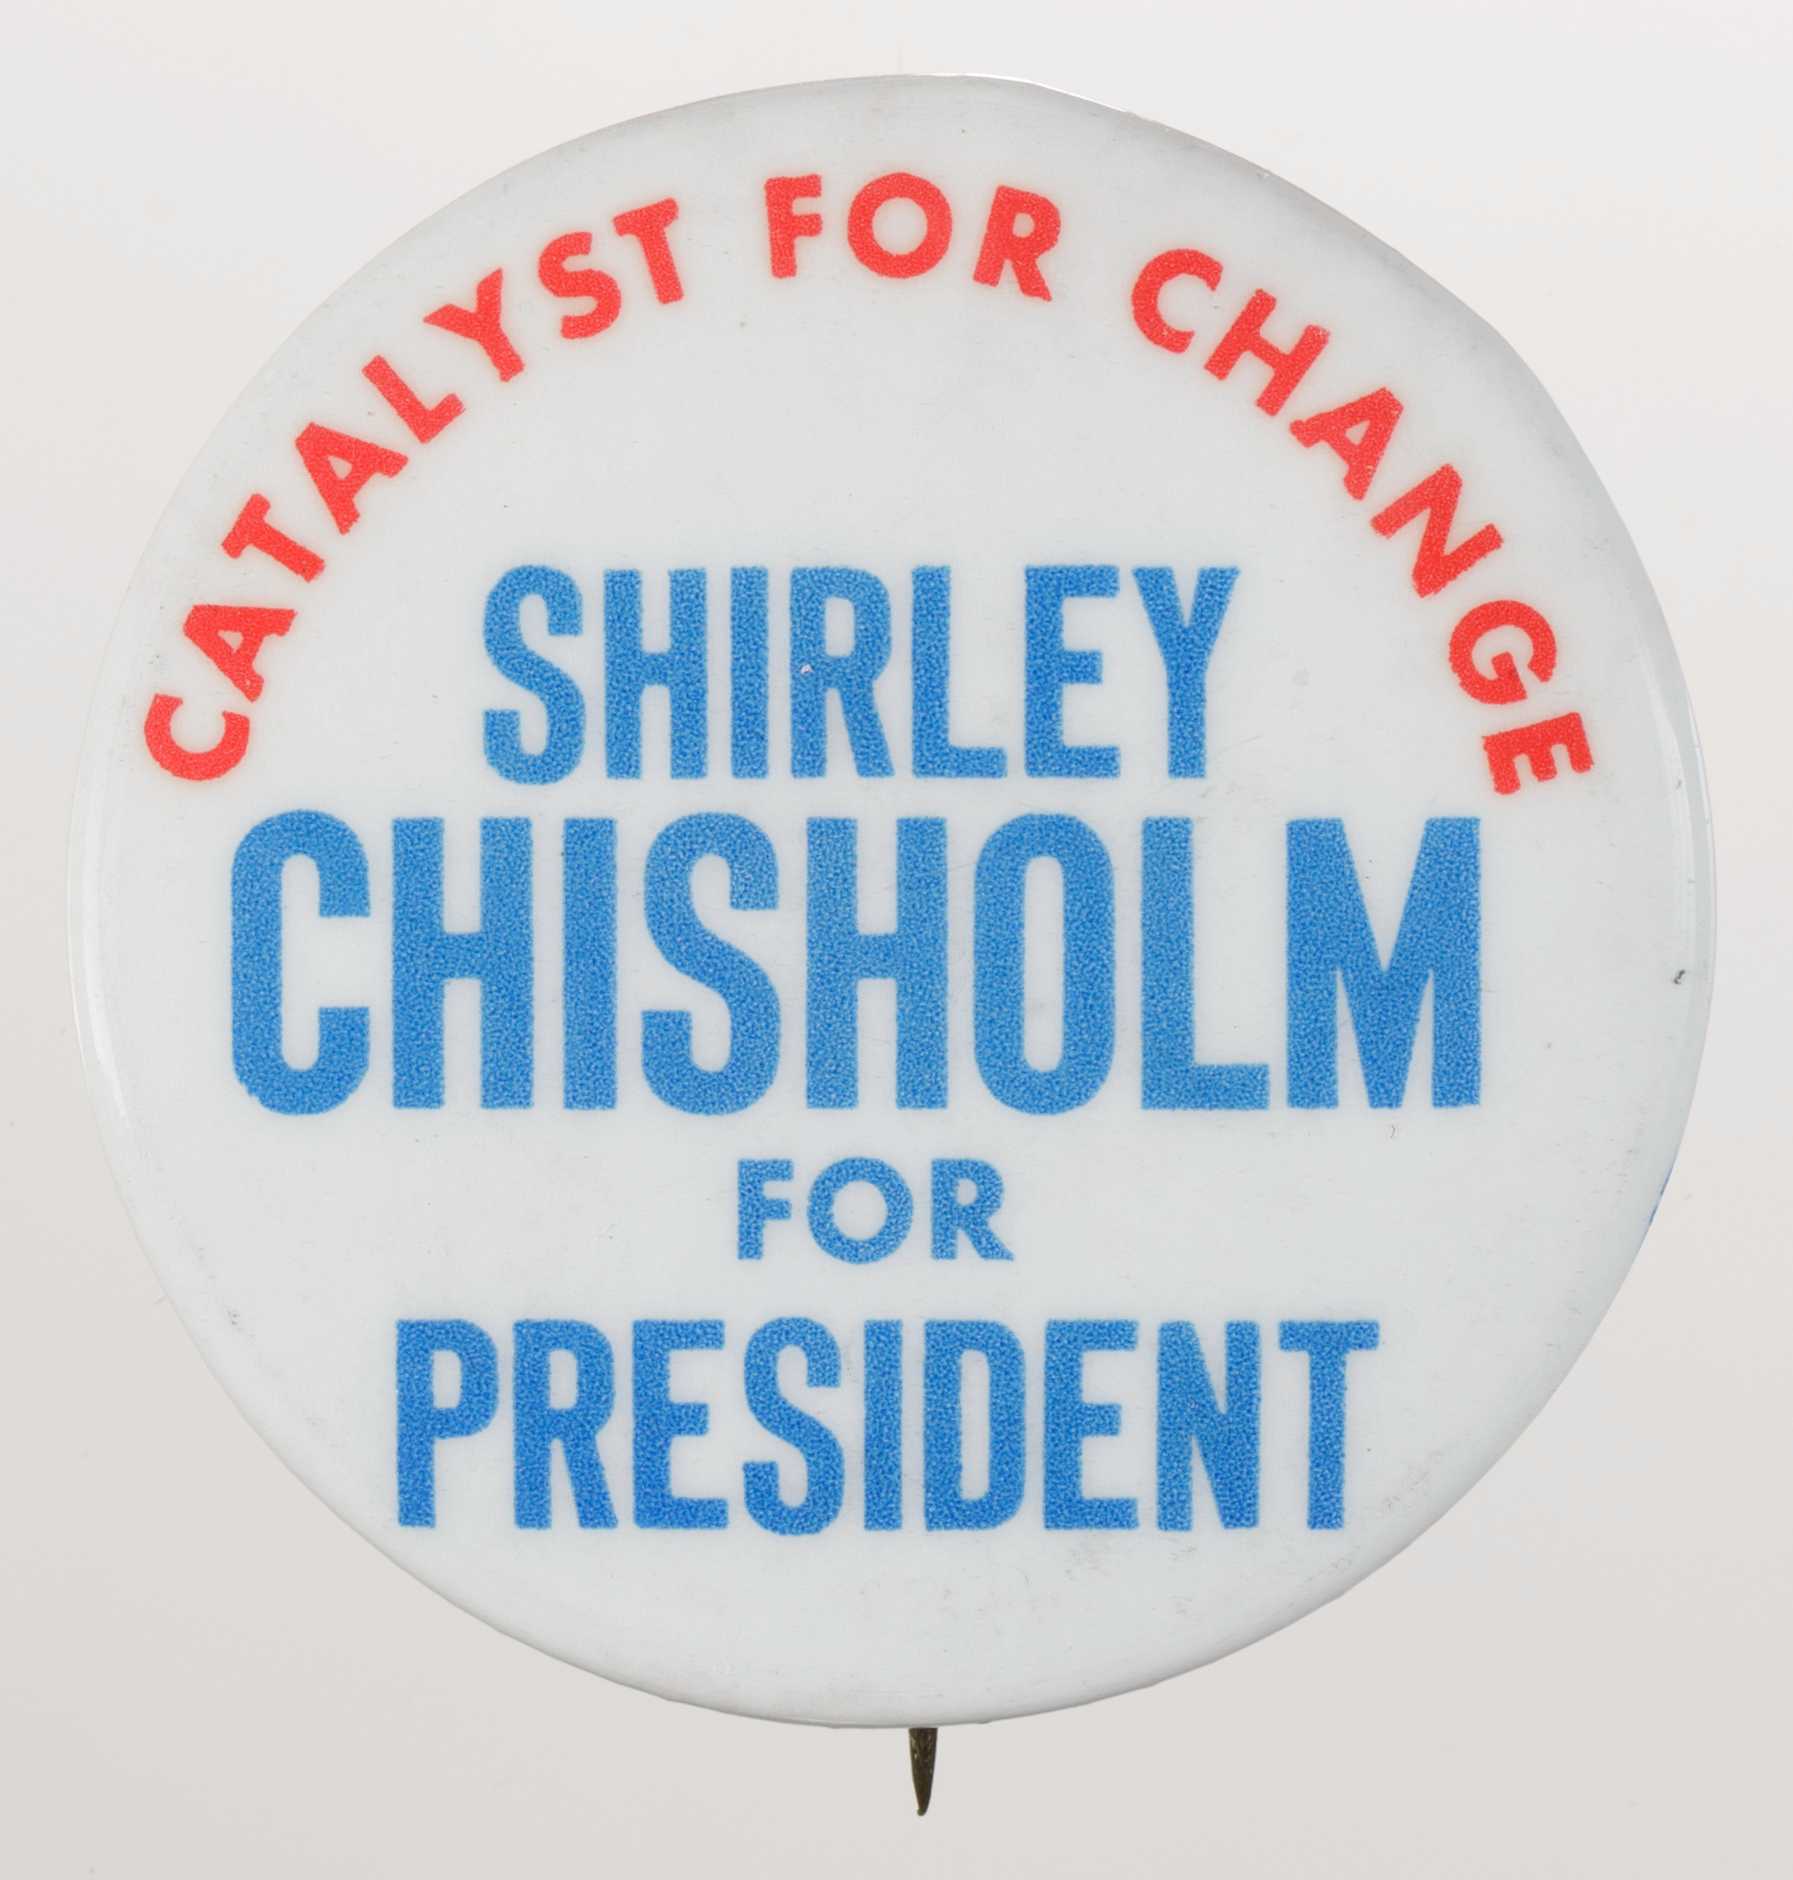 A circular metal pin-back button. The button has a white background with blue and red type that reads: [CATALYST FOR CHANGE] around the top in red, and [SHIRLEY / CHISHOLM / FOR / PRESIDENT] in blue, centered below. The edge of the pin reads in blue text: [Columbia Advertising Company 133-14 101 Richmond Hill, NY 11419]. Next to the text is a logo in blue print followed by the number [9]. The back of the button is silver in color, has a single pin without a clasp and an engraving. The engraving has a circular symbol with the word Union on one side.